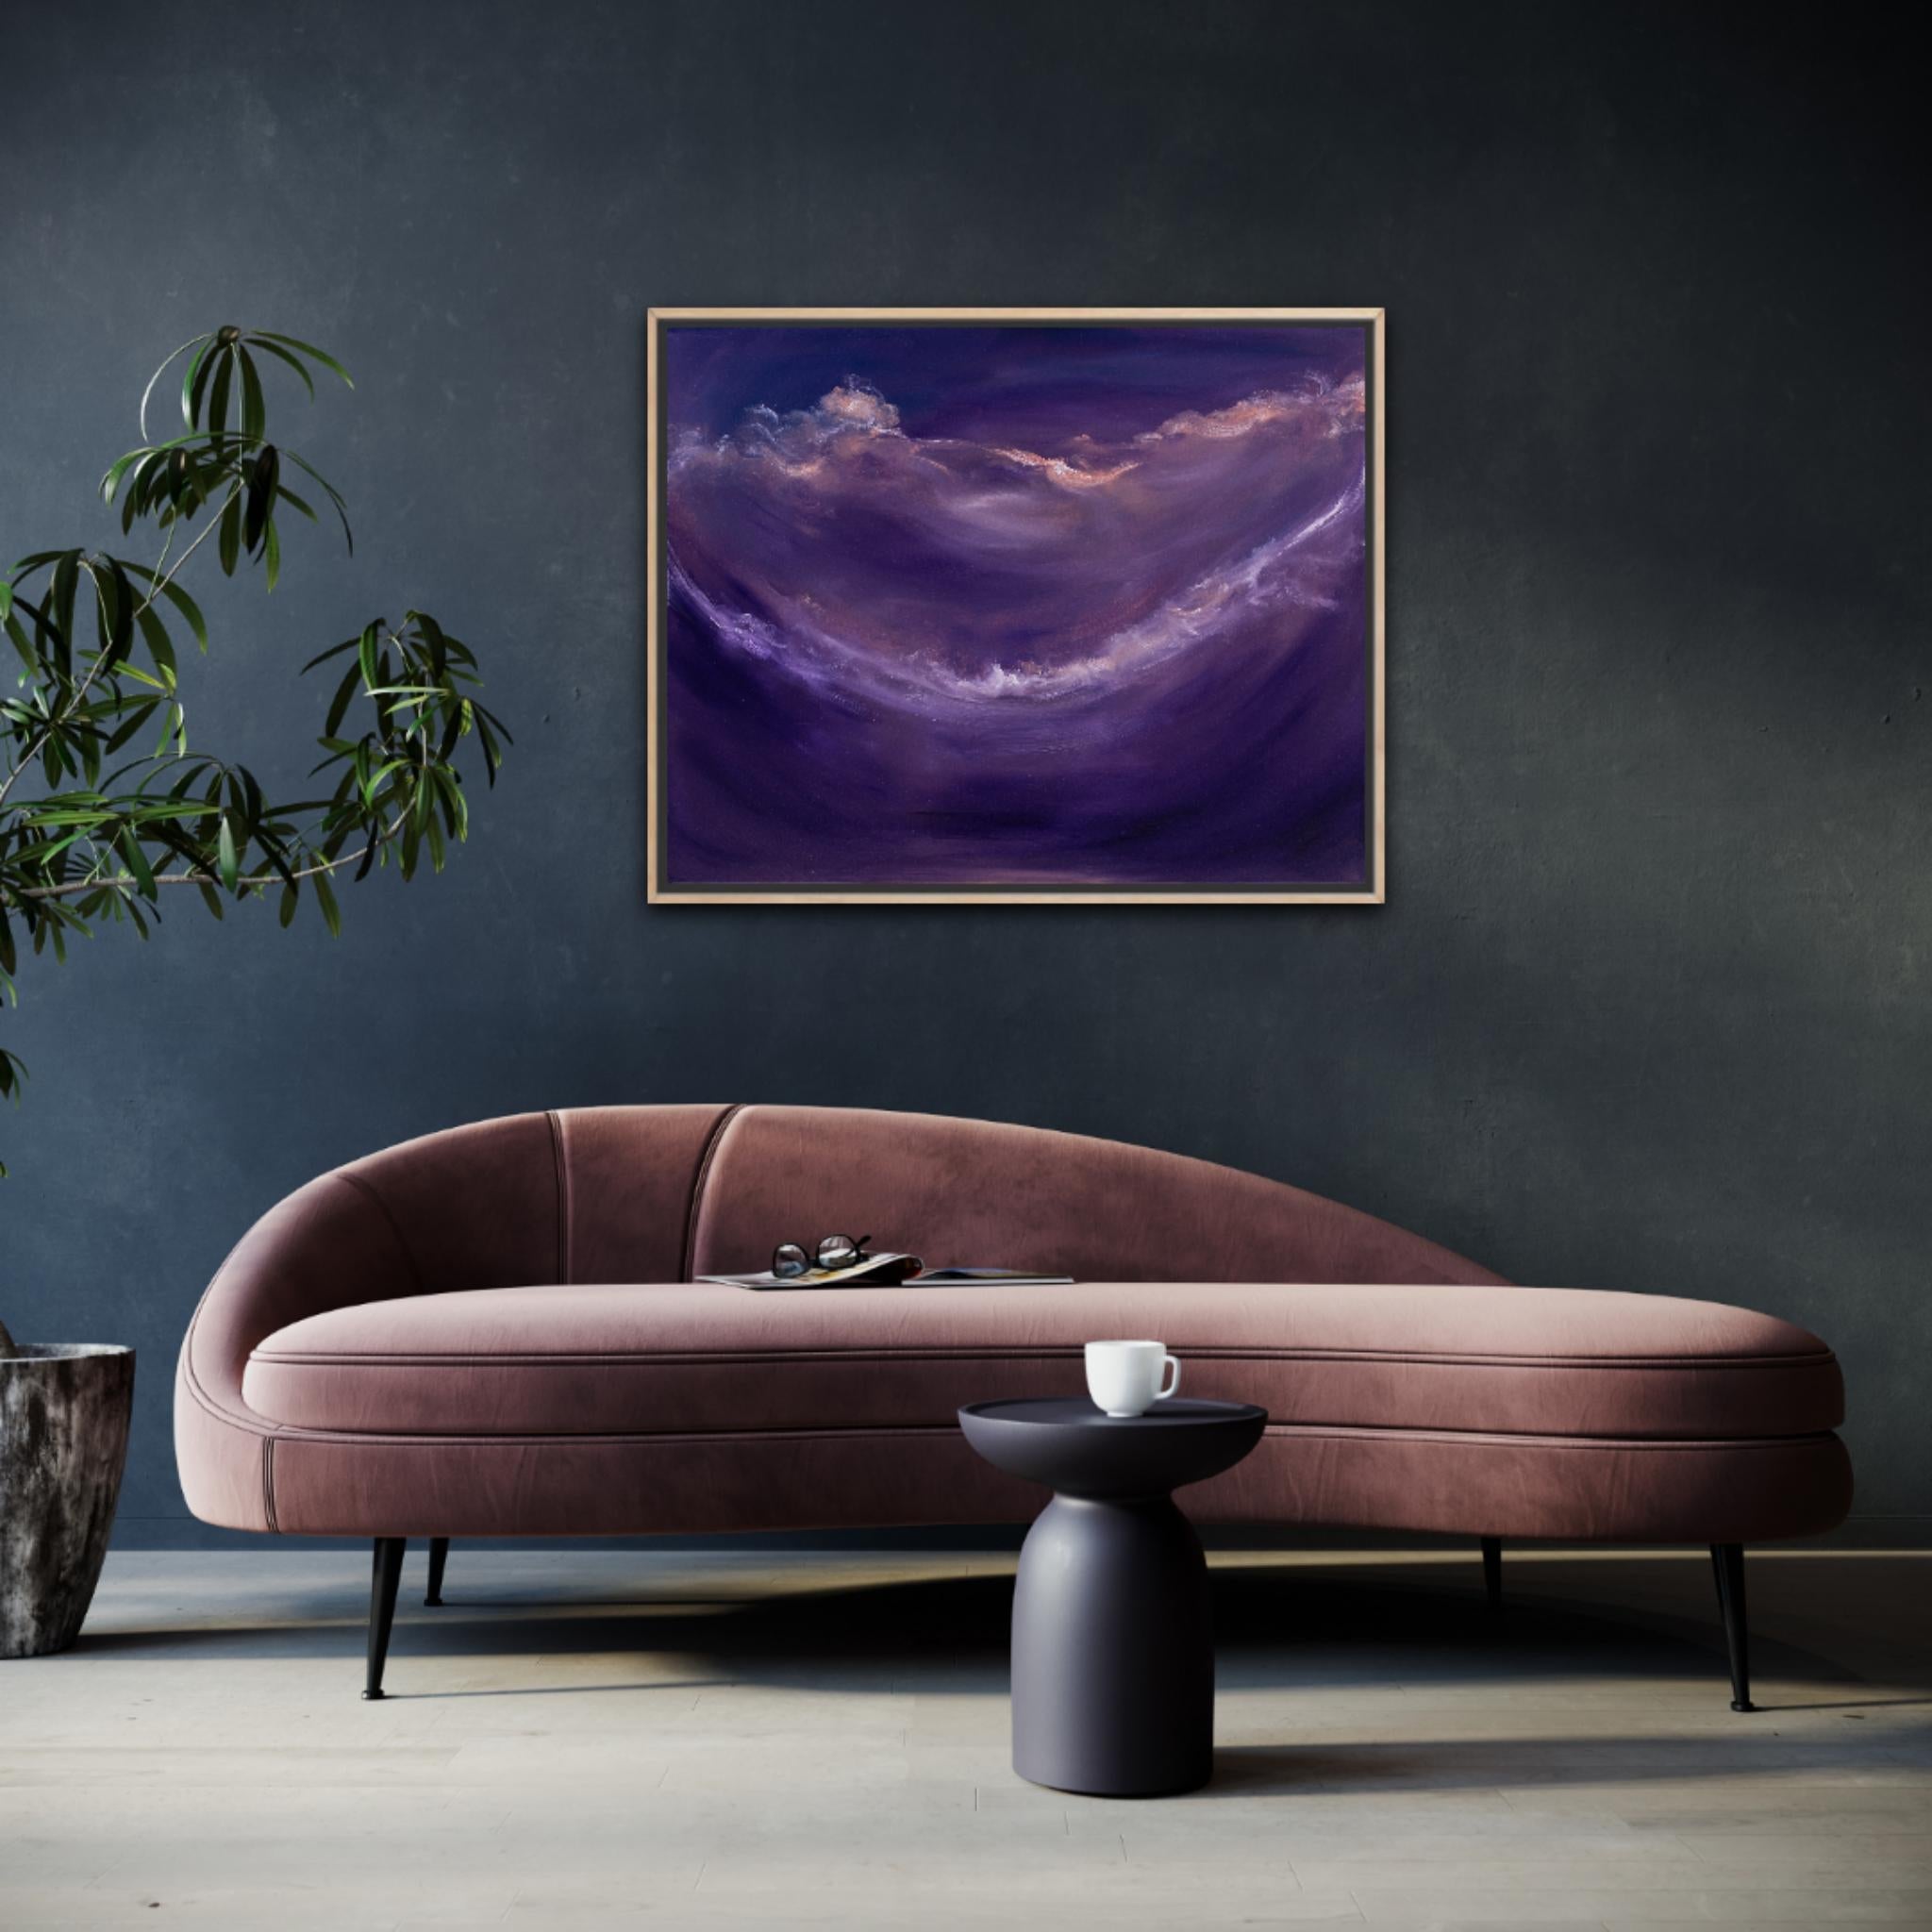 Deep space rhapsody - Abstract purple night sky painting For Sale 6